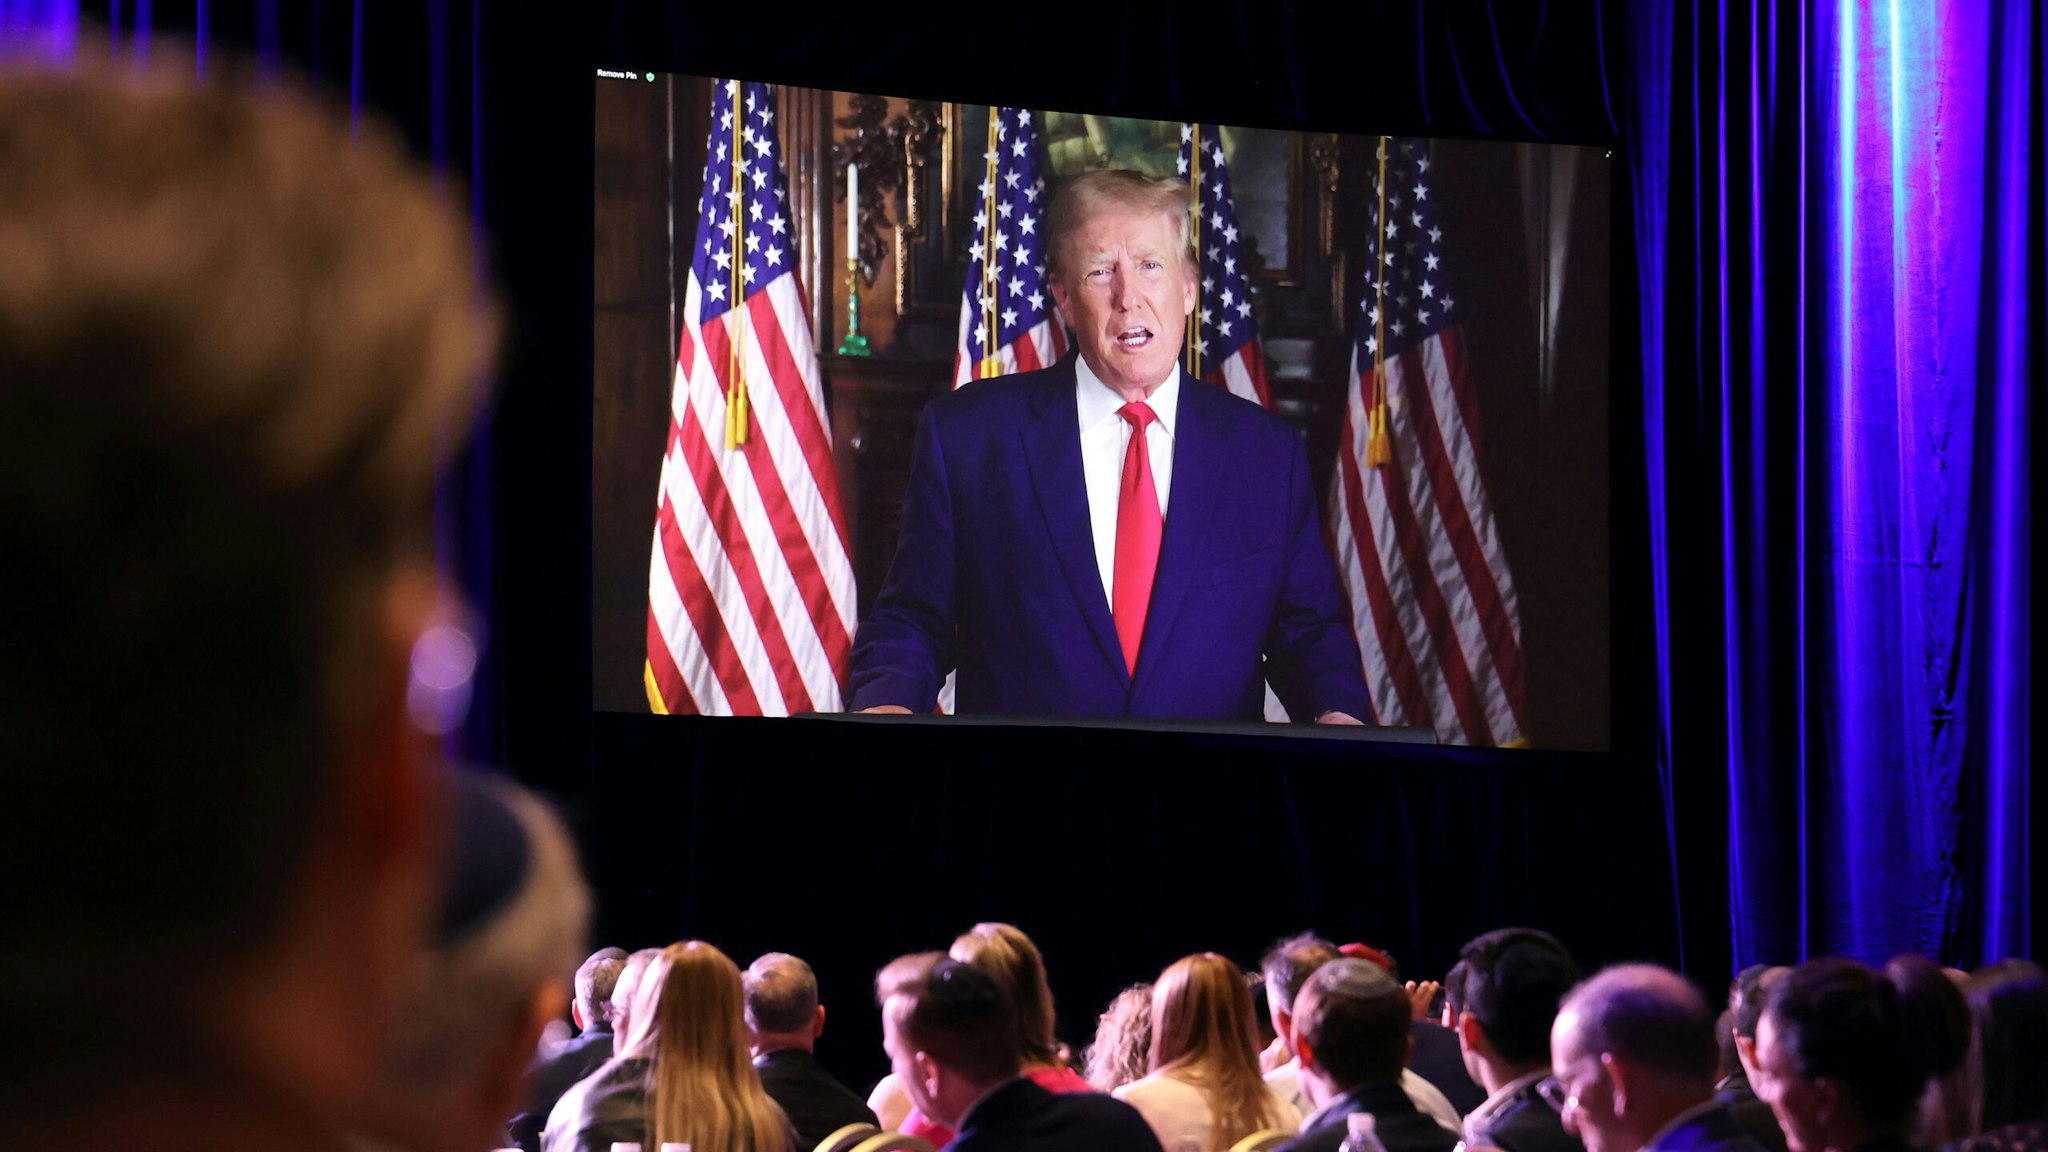 Former US President Donald Trump speaks via video link during the Republican Jewish Coalition (RJC) Annual Leadership Meeting in Las Vegas, Nevada, US, on Saturday, Nov. 19, 2022. Democrats defied political forecasts and historical trends to keep control of the Senate in a win for President Joe Biden, as voters rejected a handful of candidates backed by former President Donald Trump.